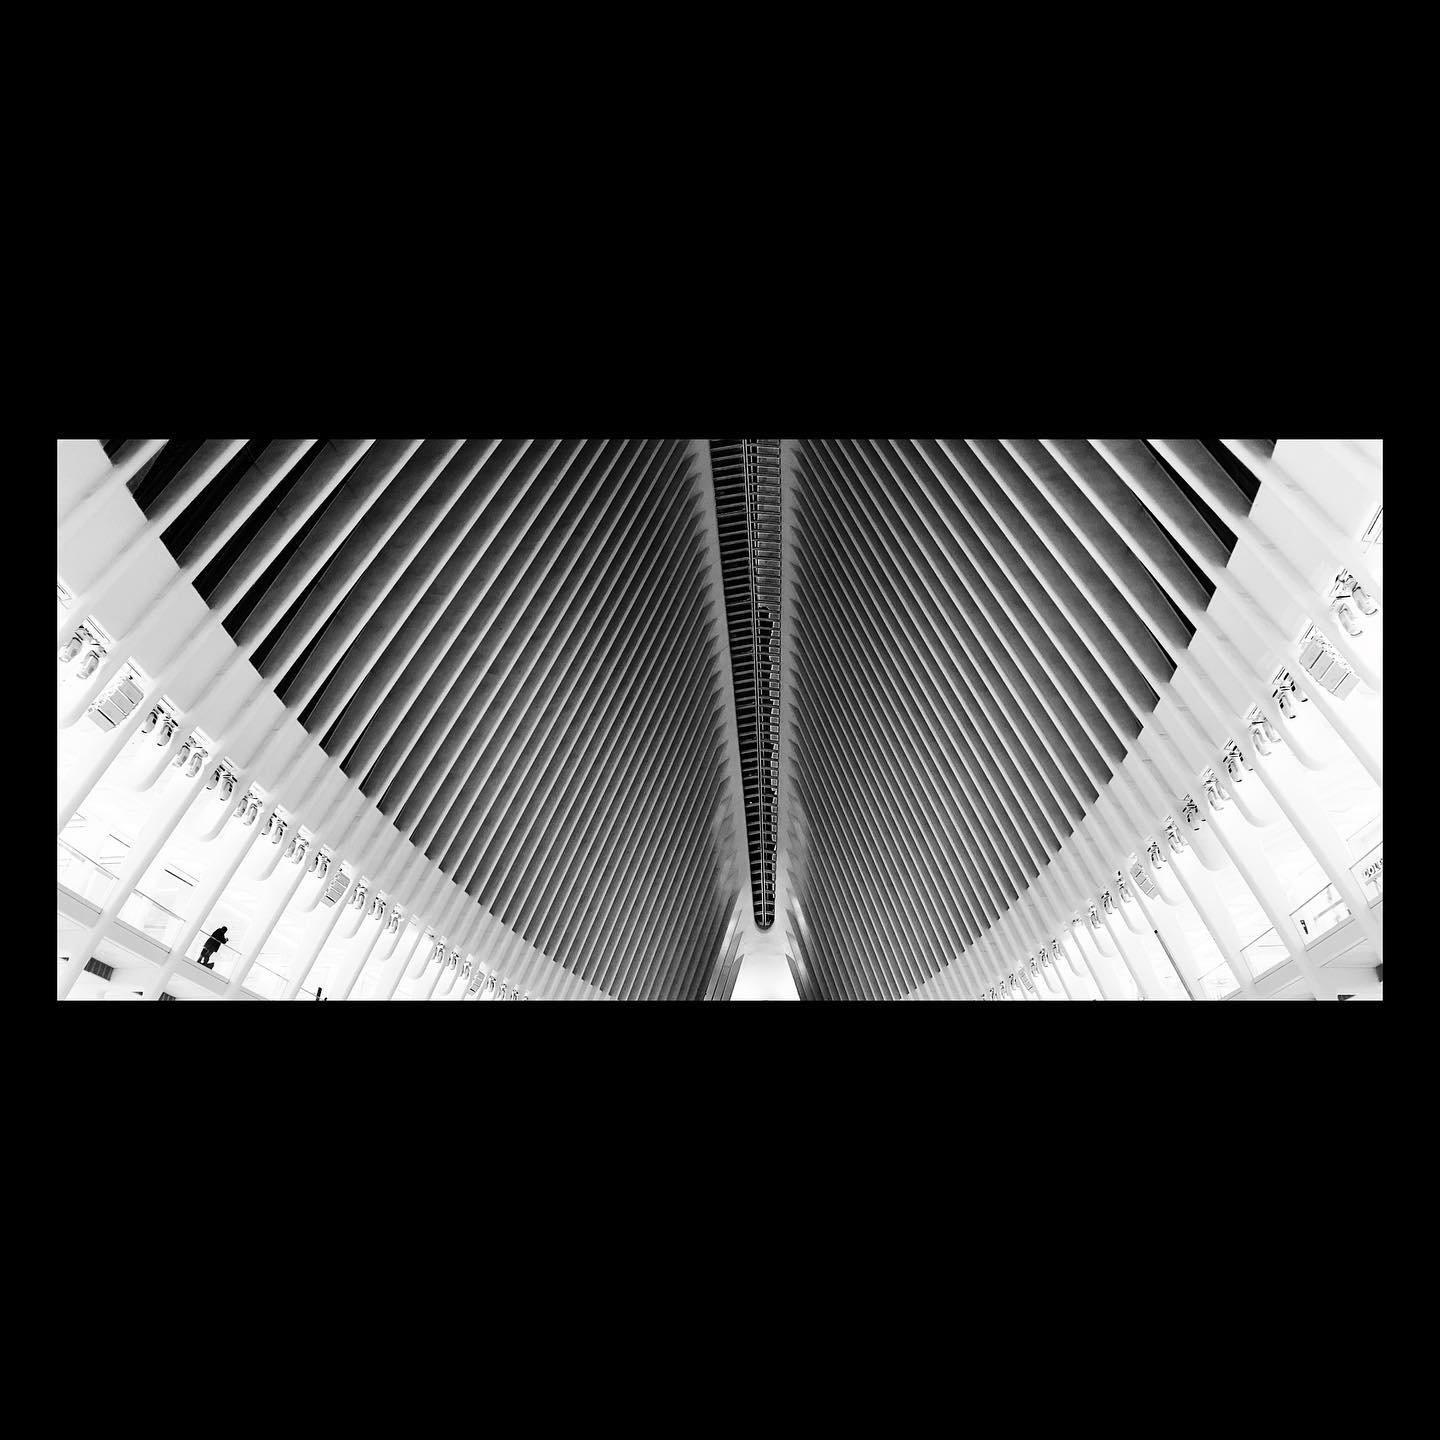 Wings. #momentanamorphic #moment #oculus #wtc #nyc #bw #blackandwhite #agameoftones #lines #empty #shotoniphone #iphone11pro #snapseed #whitagram